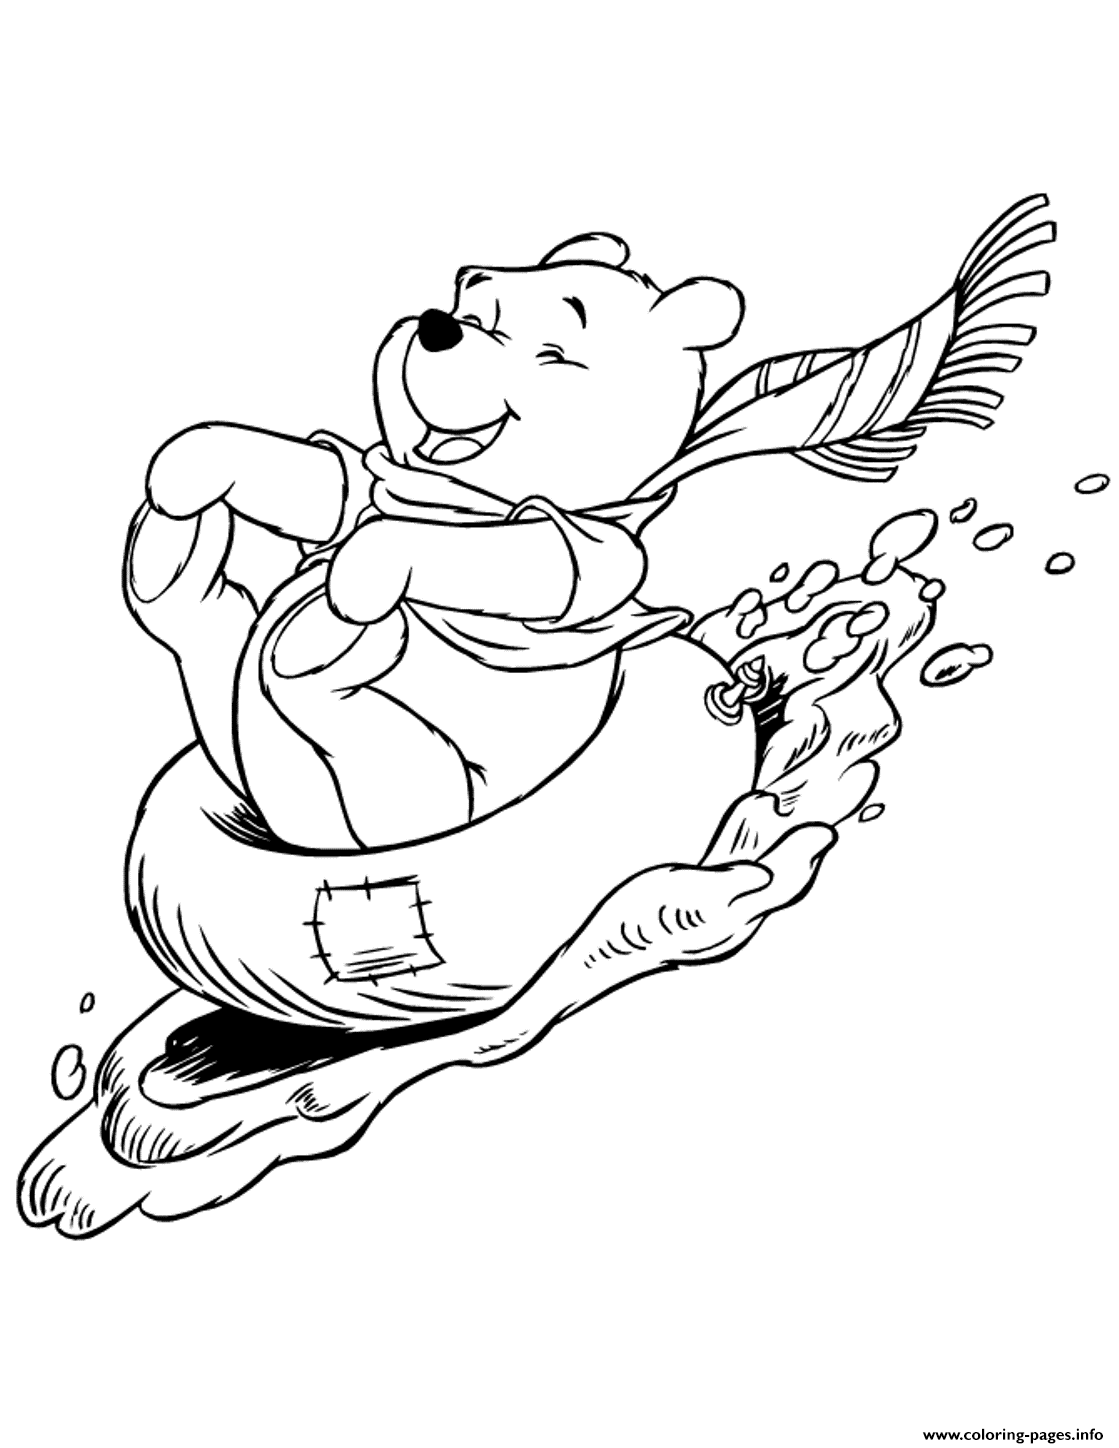 Winnie The Pooh S Sledding In Winterde83 Coloring Pages ...